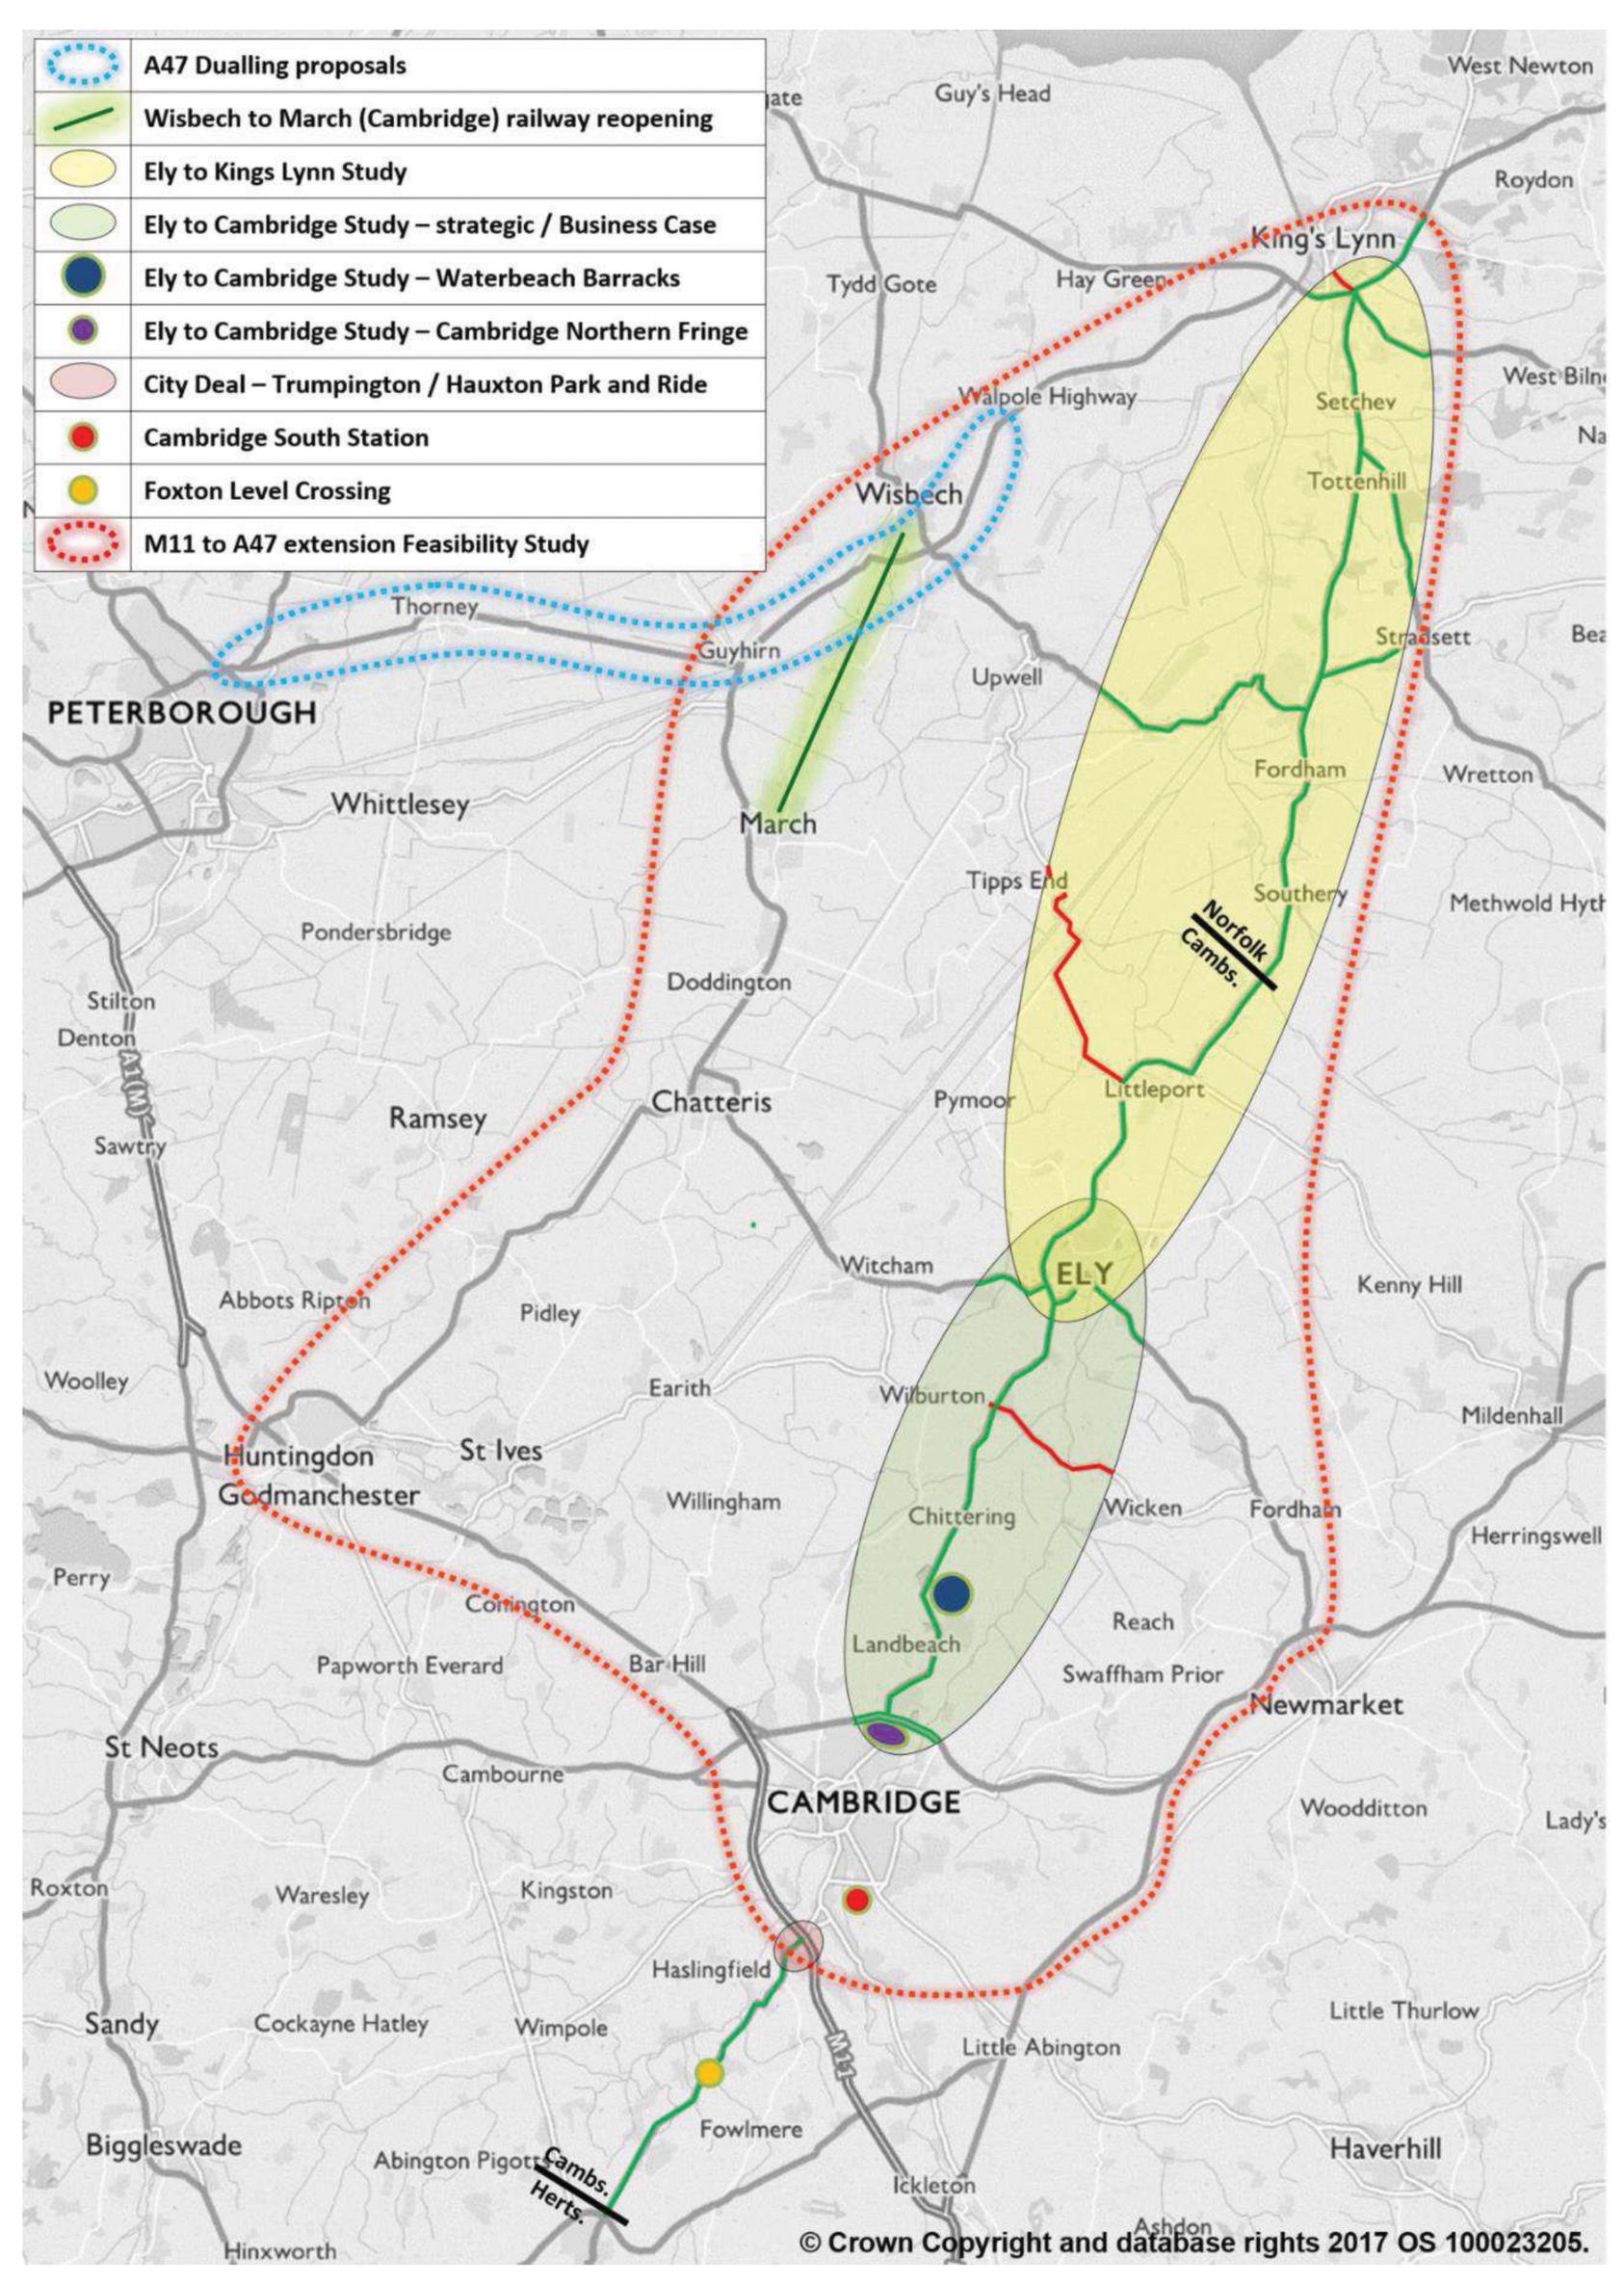 The map shows the various studies in the area